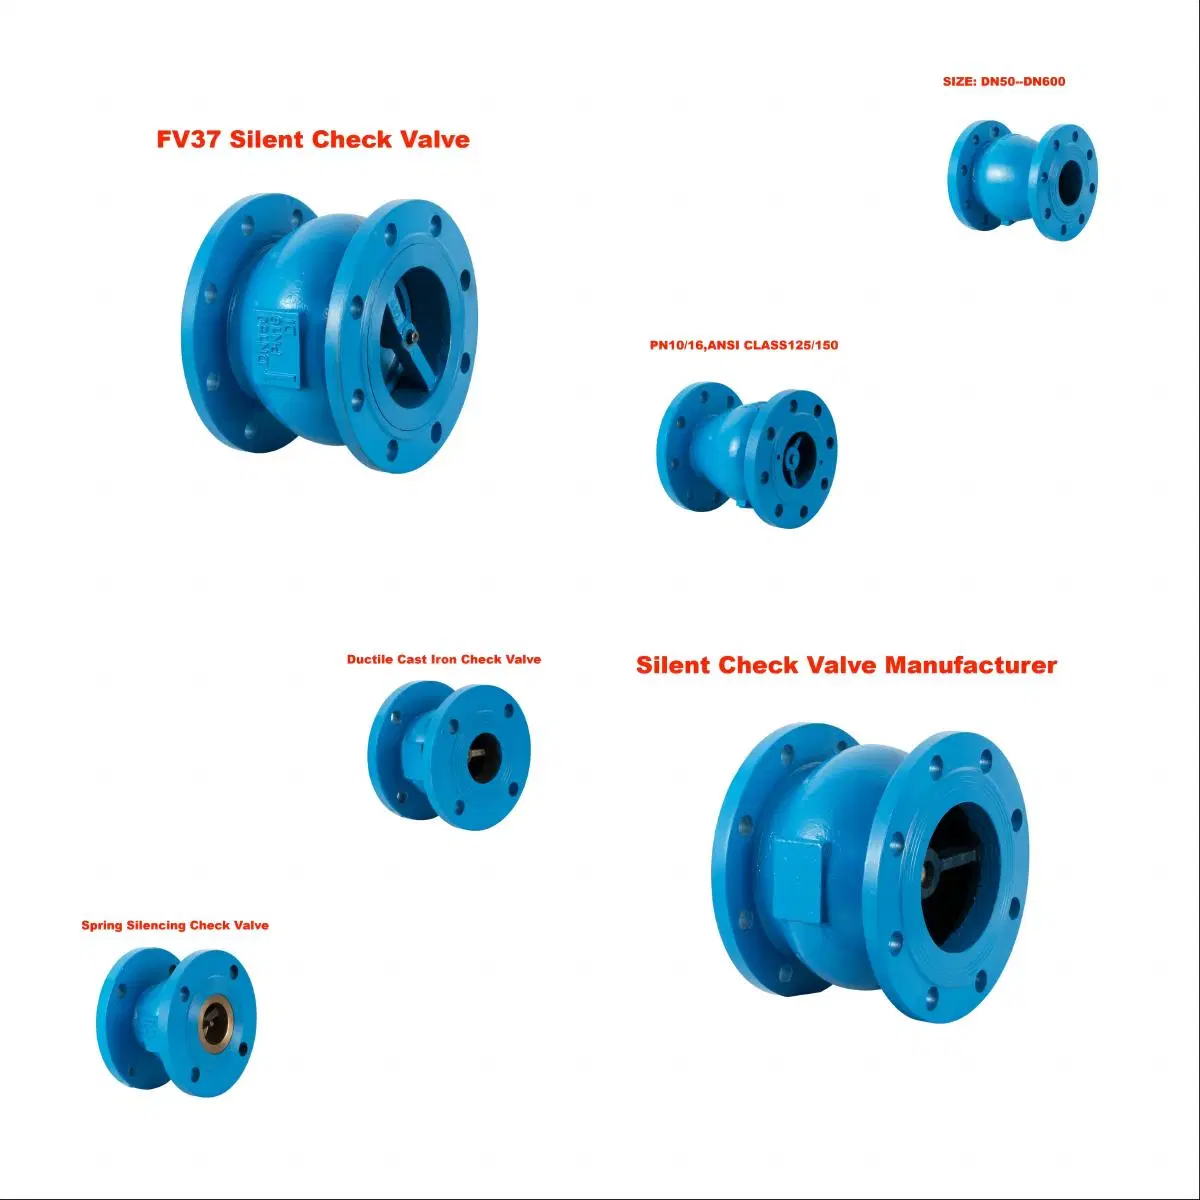 Large Size Silent Check Valve for Water Pipes